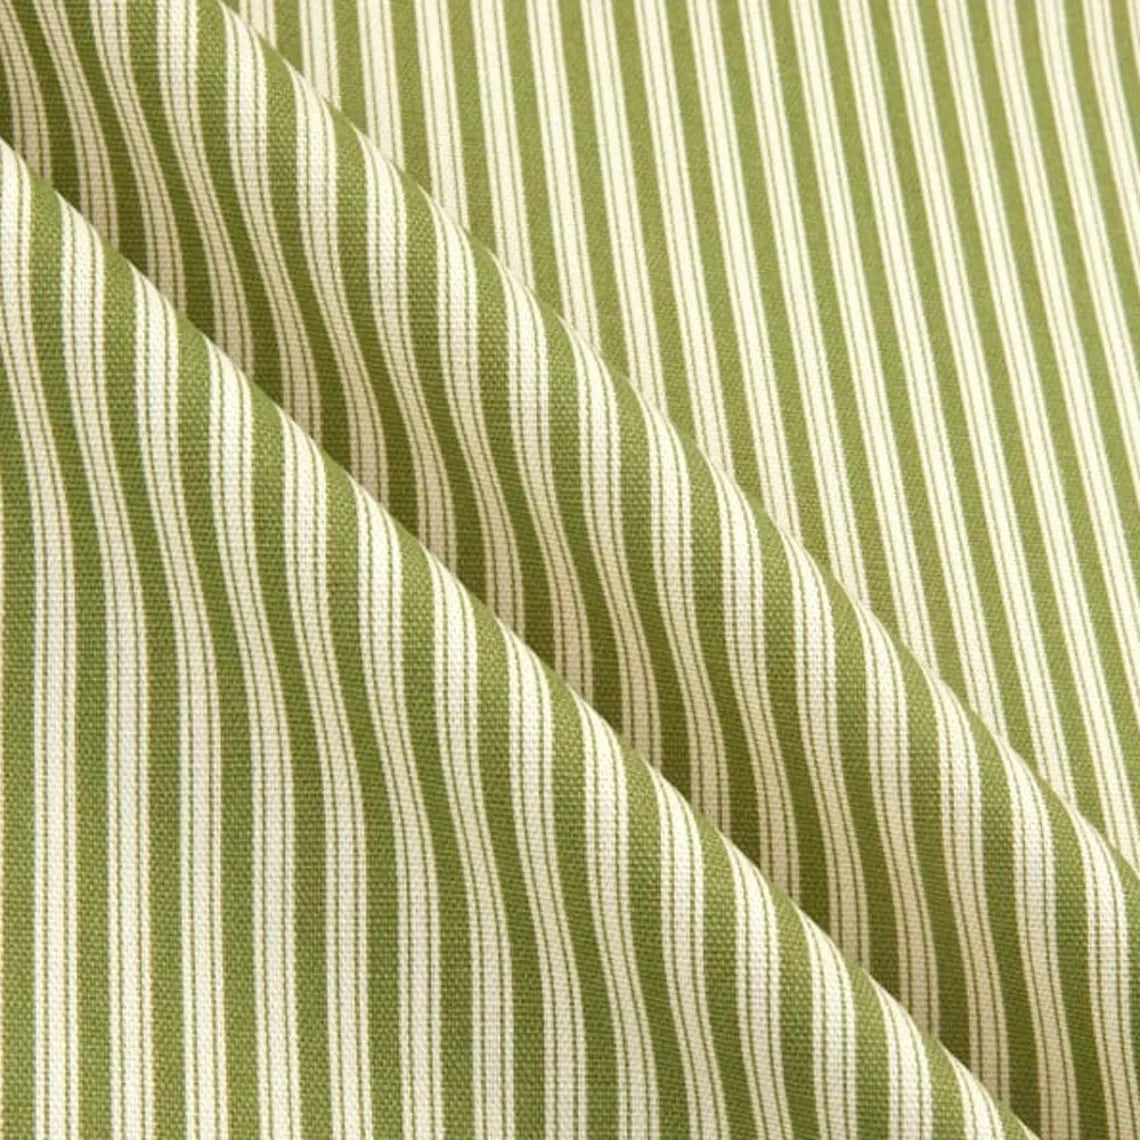 tailored bedskirt in polo jungle green stripe on cream